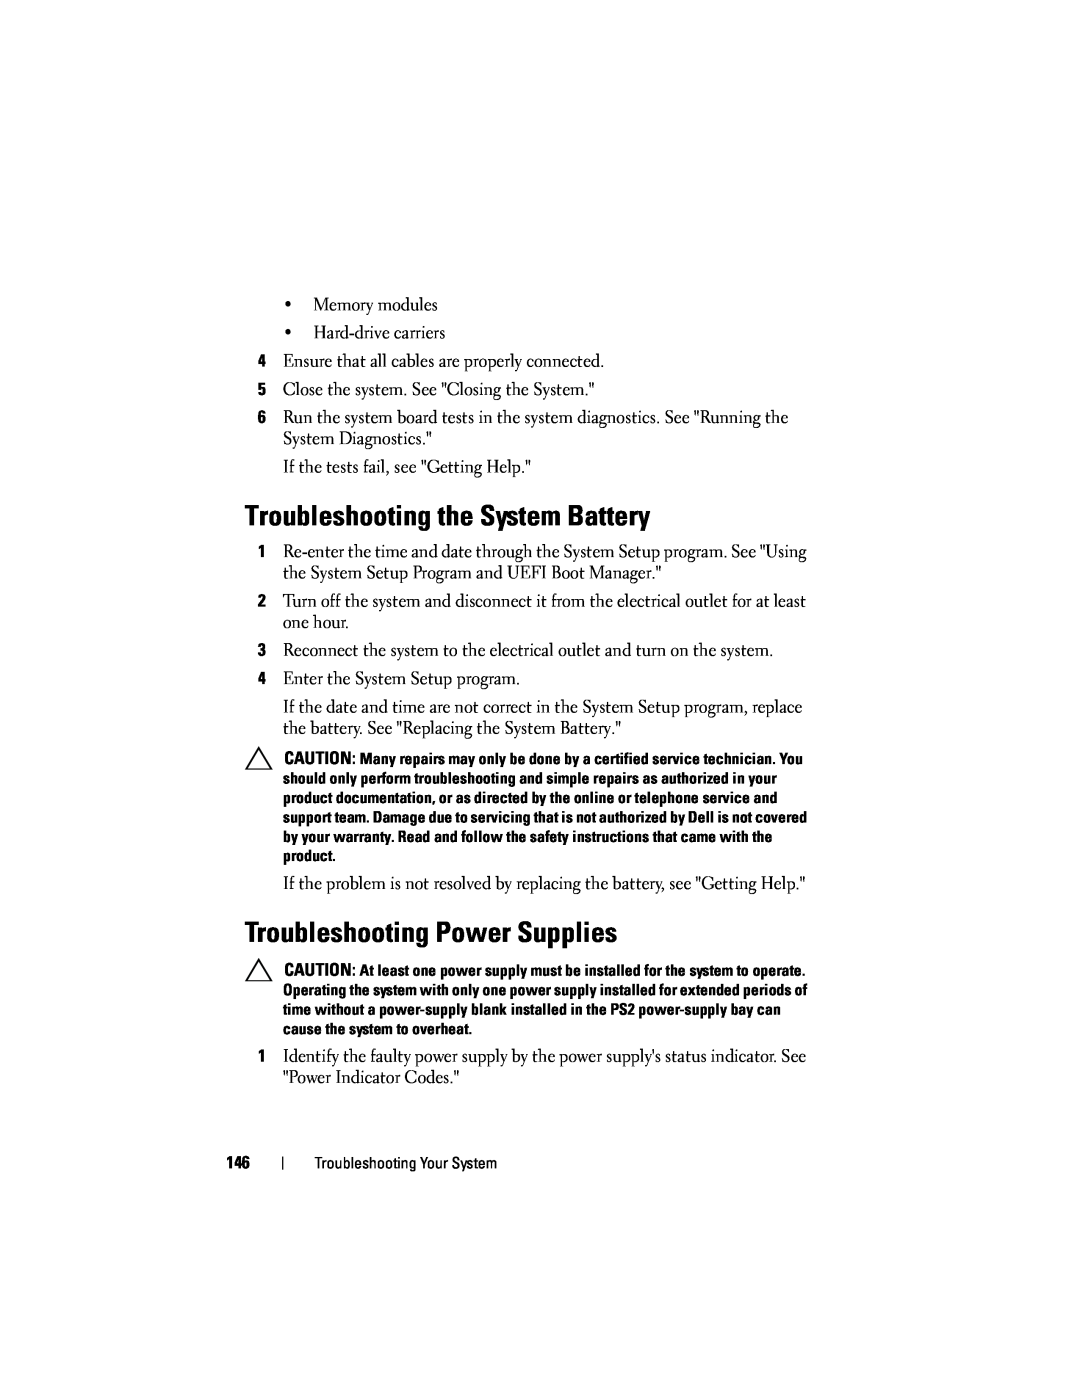 Dell R610 owner manual Troubleshooting the System Battery, Troubleshooting Power Supplies 